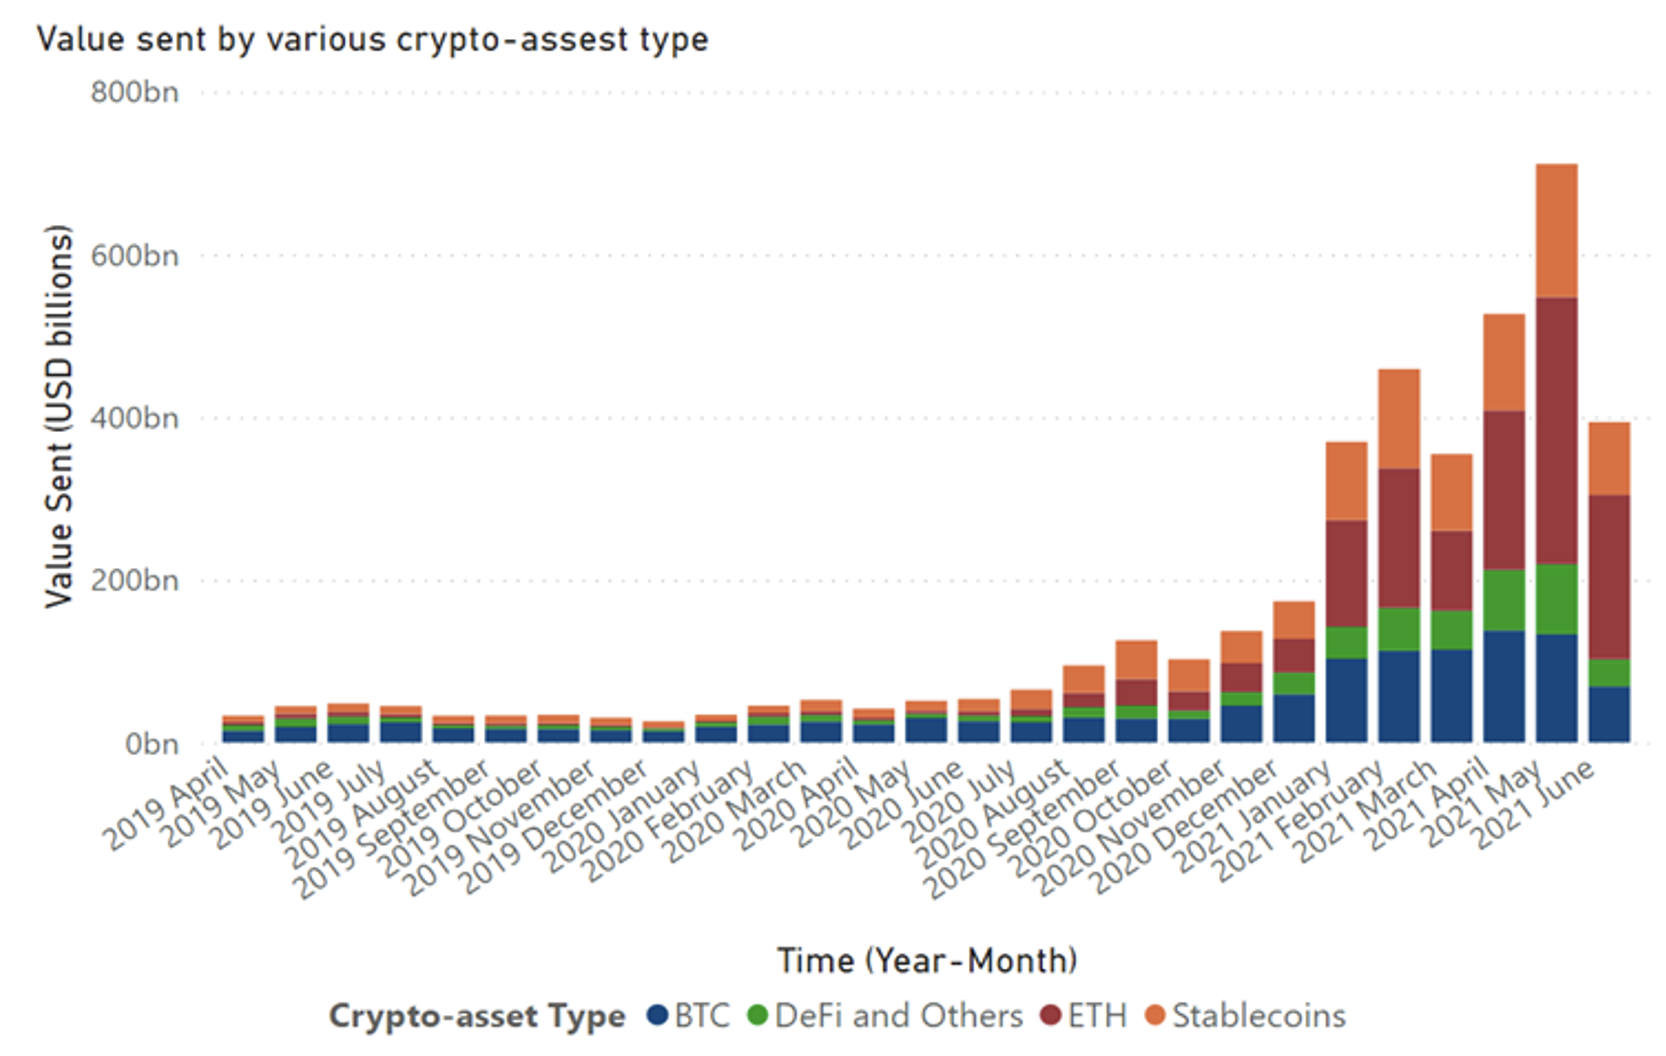 The ascent of crypto assets: Evolution and macro-financial drivers 2